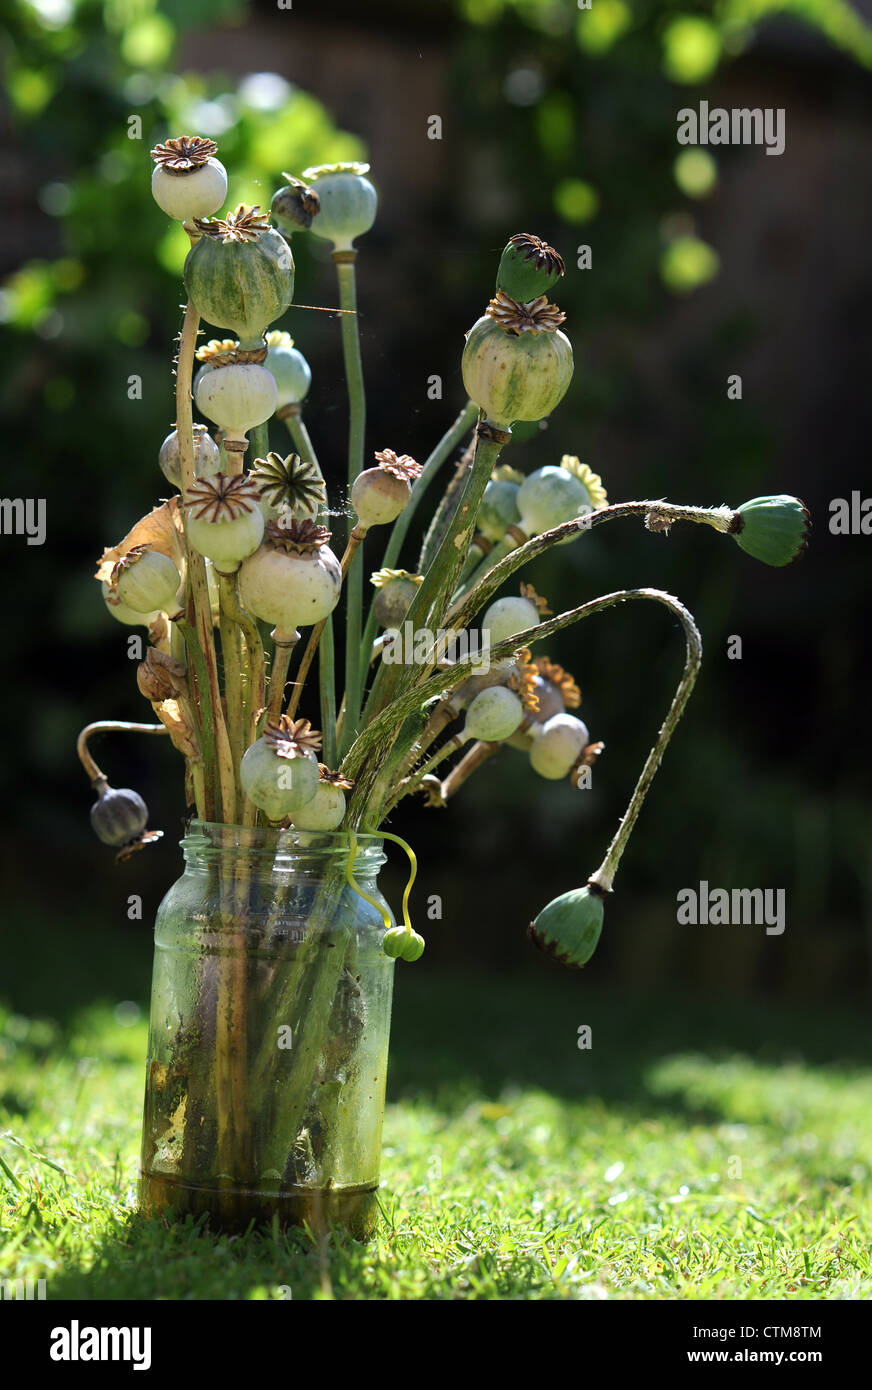 Poppy flower seed pod heads in a jar with water outdoors still life Stock Photo